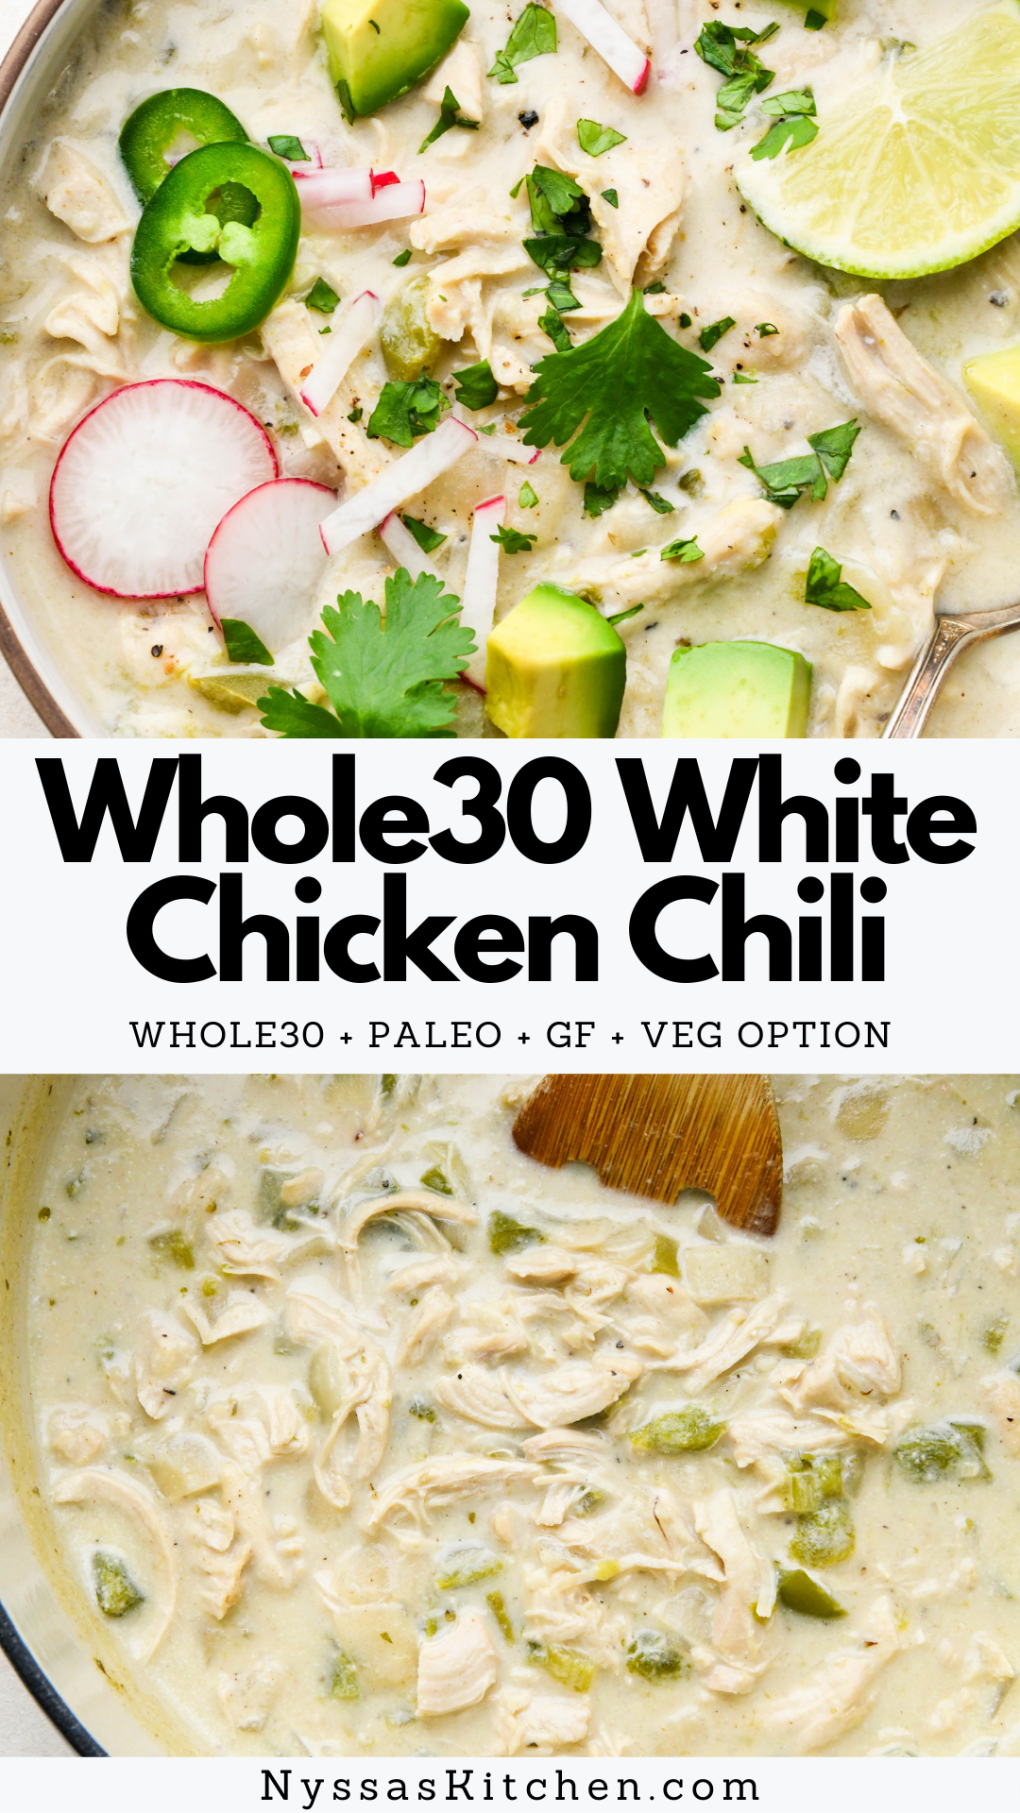 Pinterest Pin for Whole30 White Chicken Chili